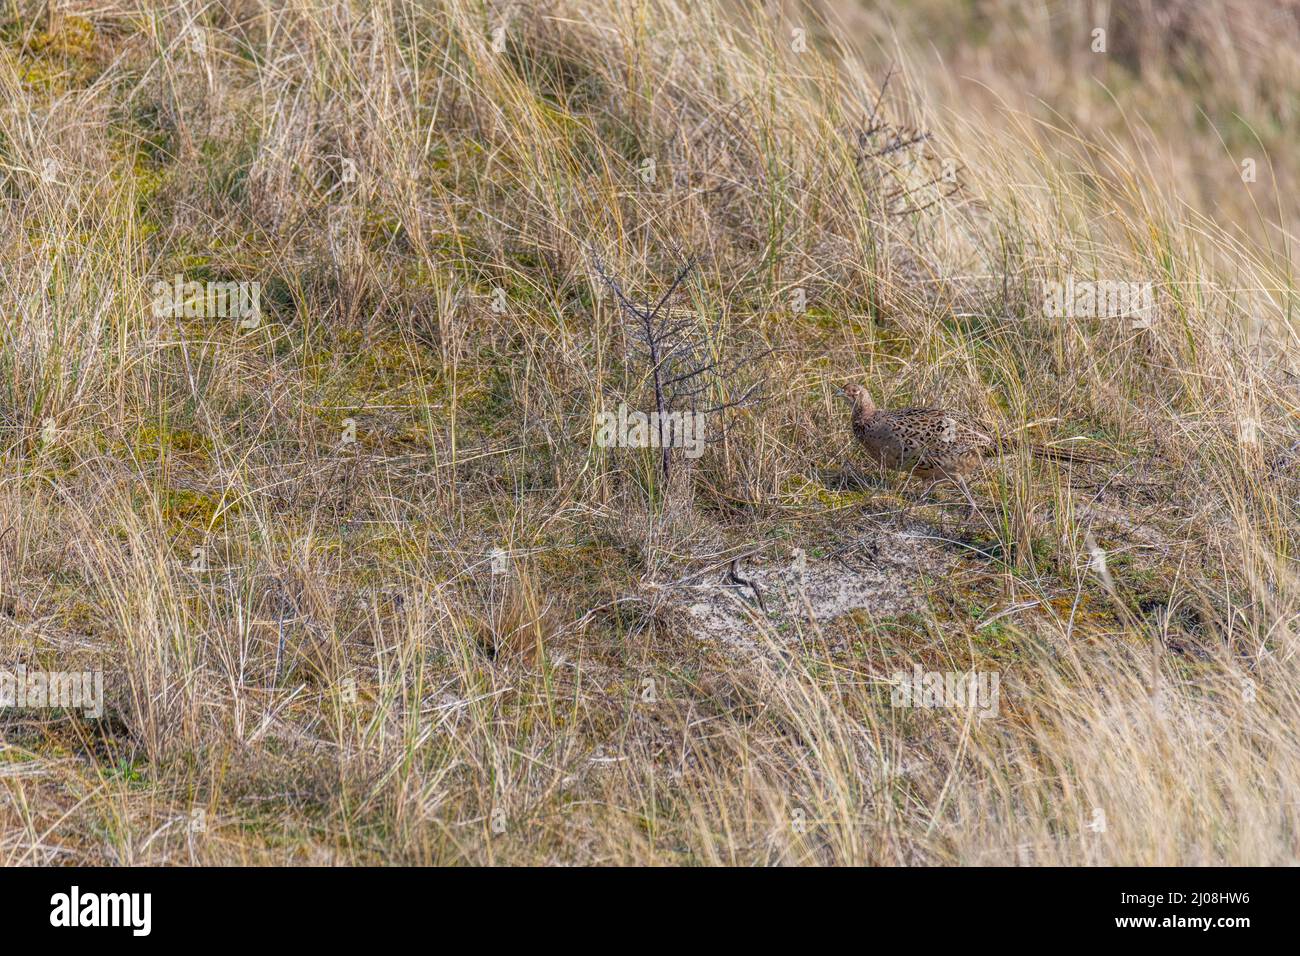 a female pheasant  on the island of juist between the dunes Stock Photo